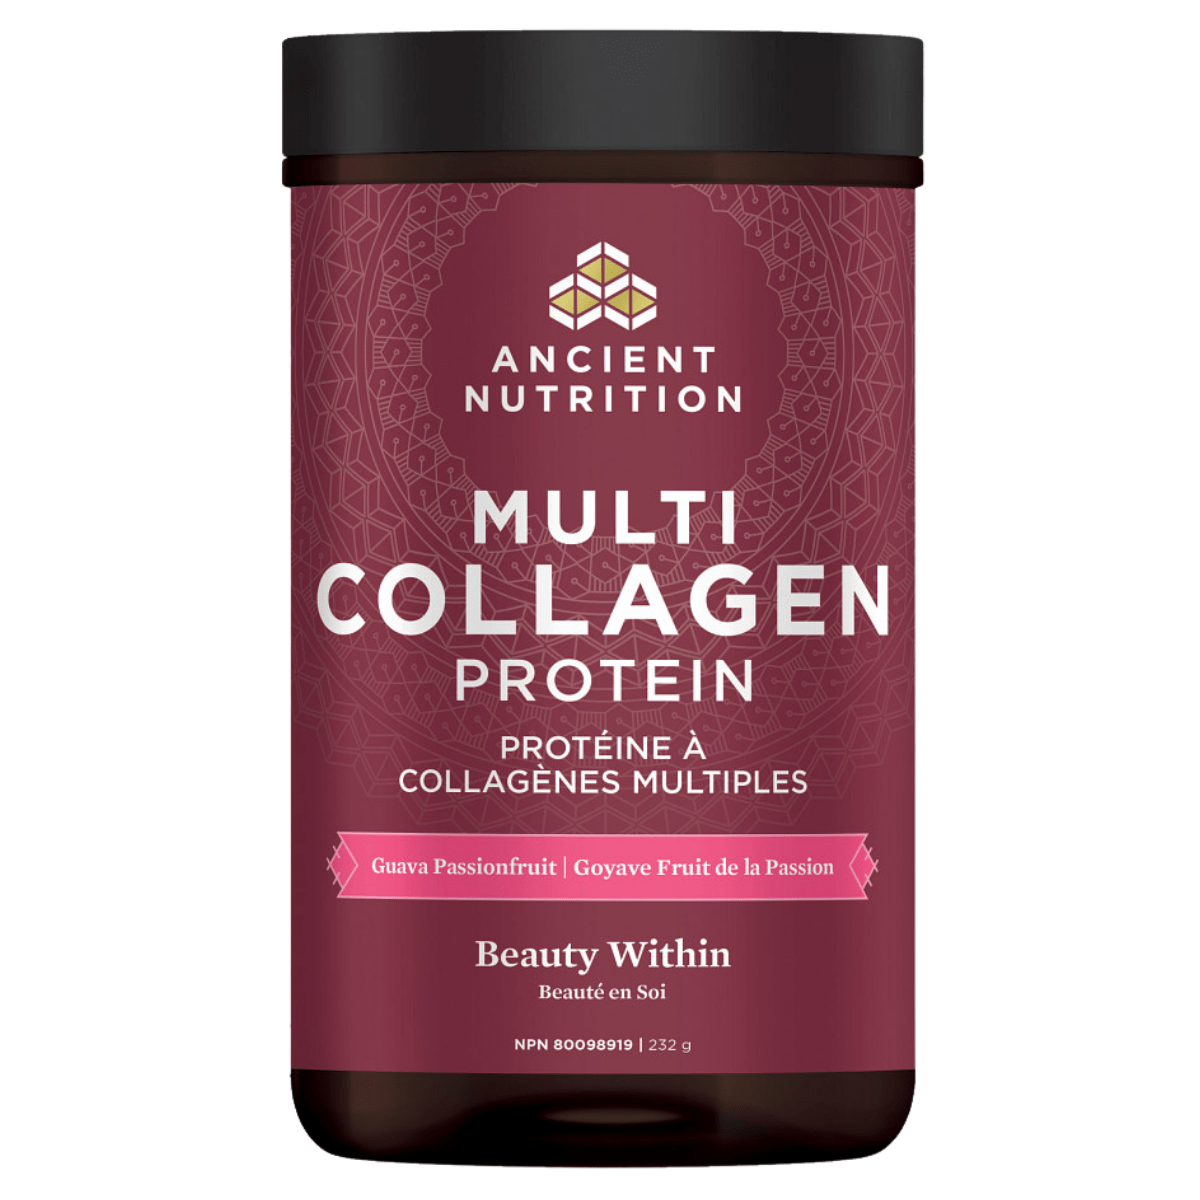 Ancient Nutrition Multi Collagen Protein Beauty Within Guava Passionfruit, 232g